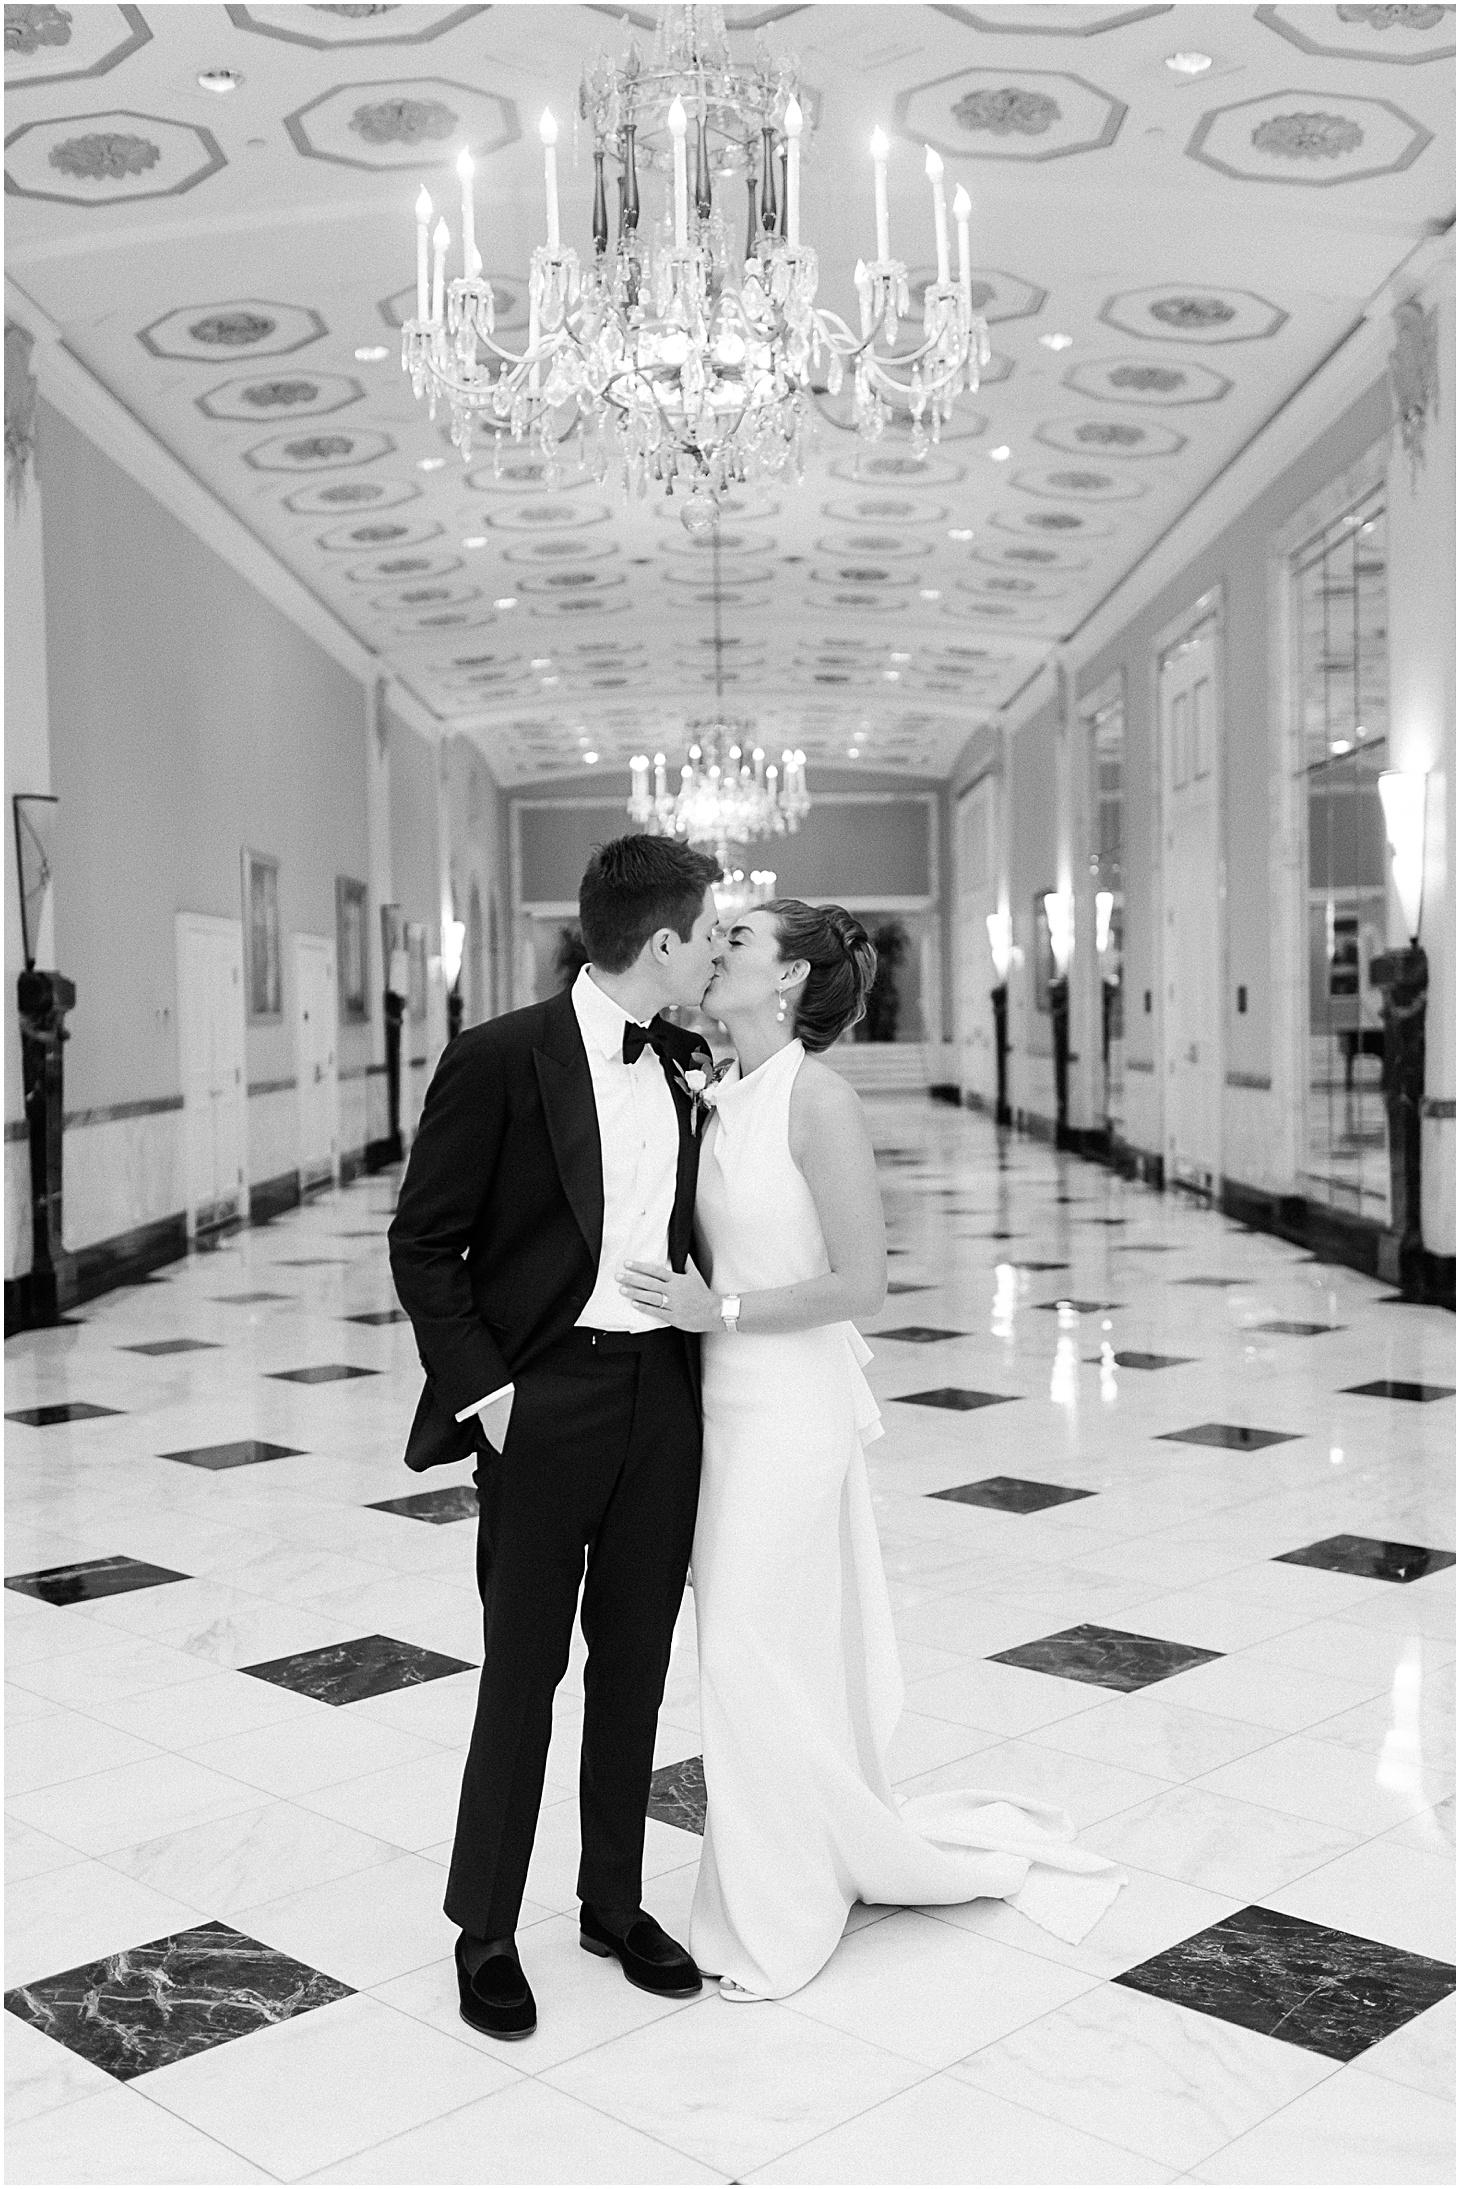 Oscar de la Renta bride at The Mayflower Hotel DC |  | The 10 Best DC Hotels for  Getting Ready on Your Wedding Day